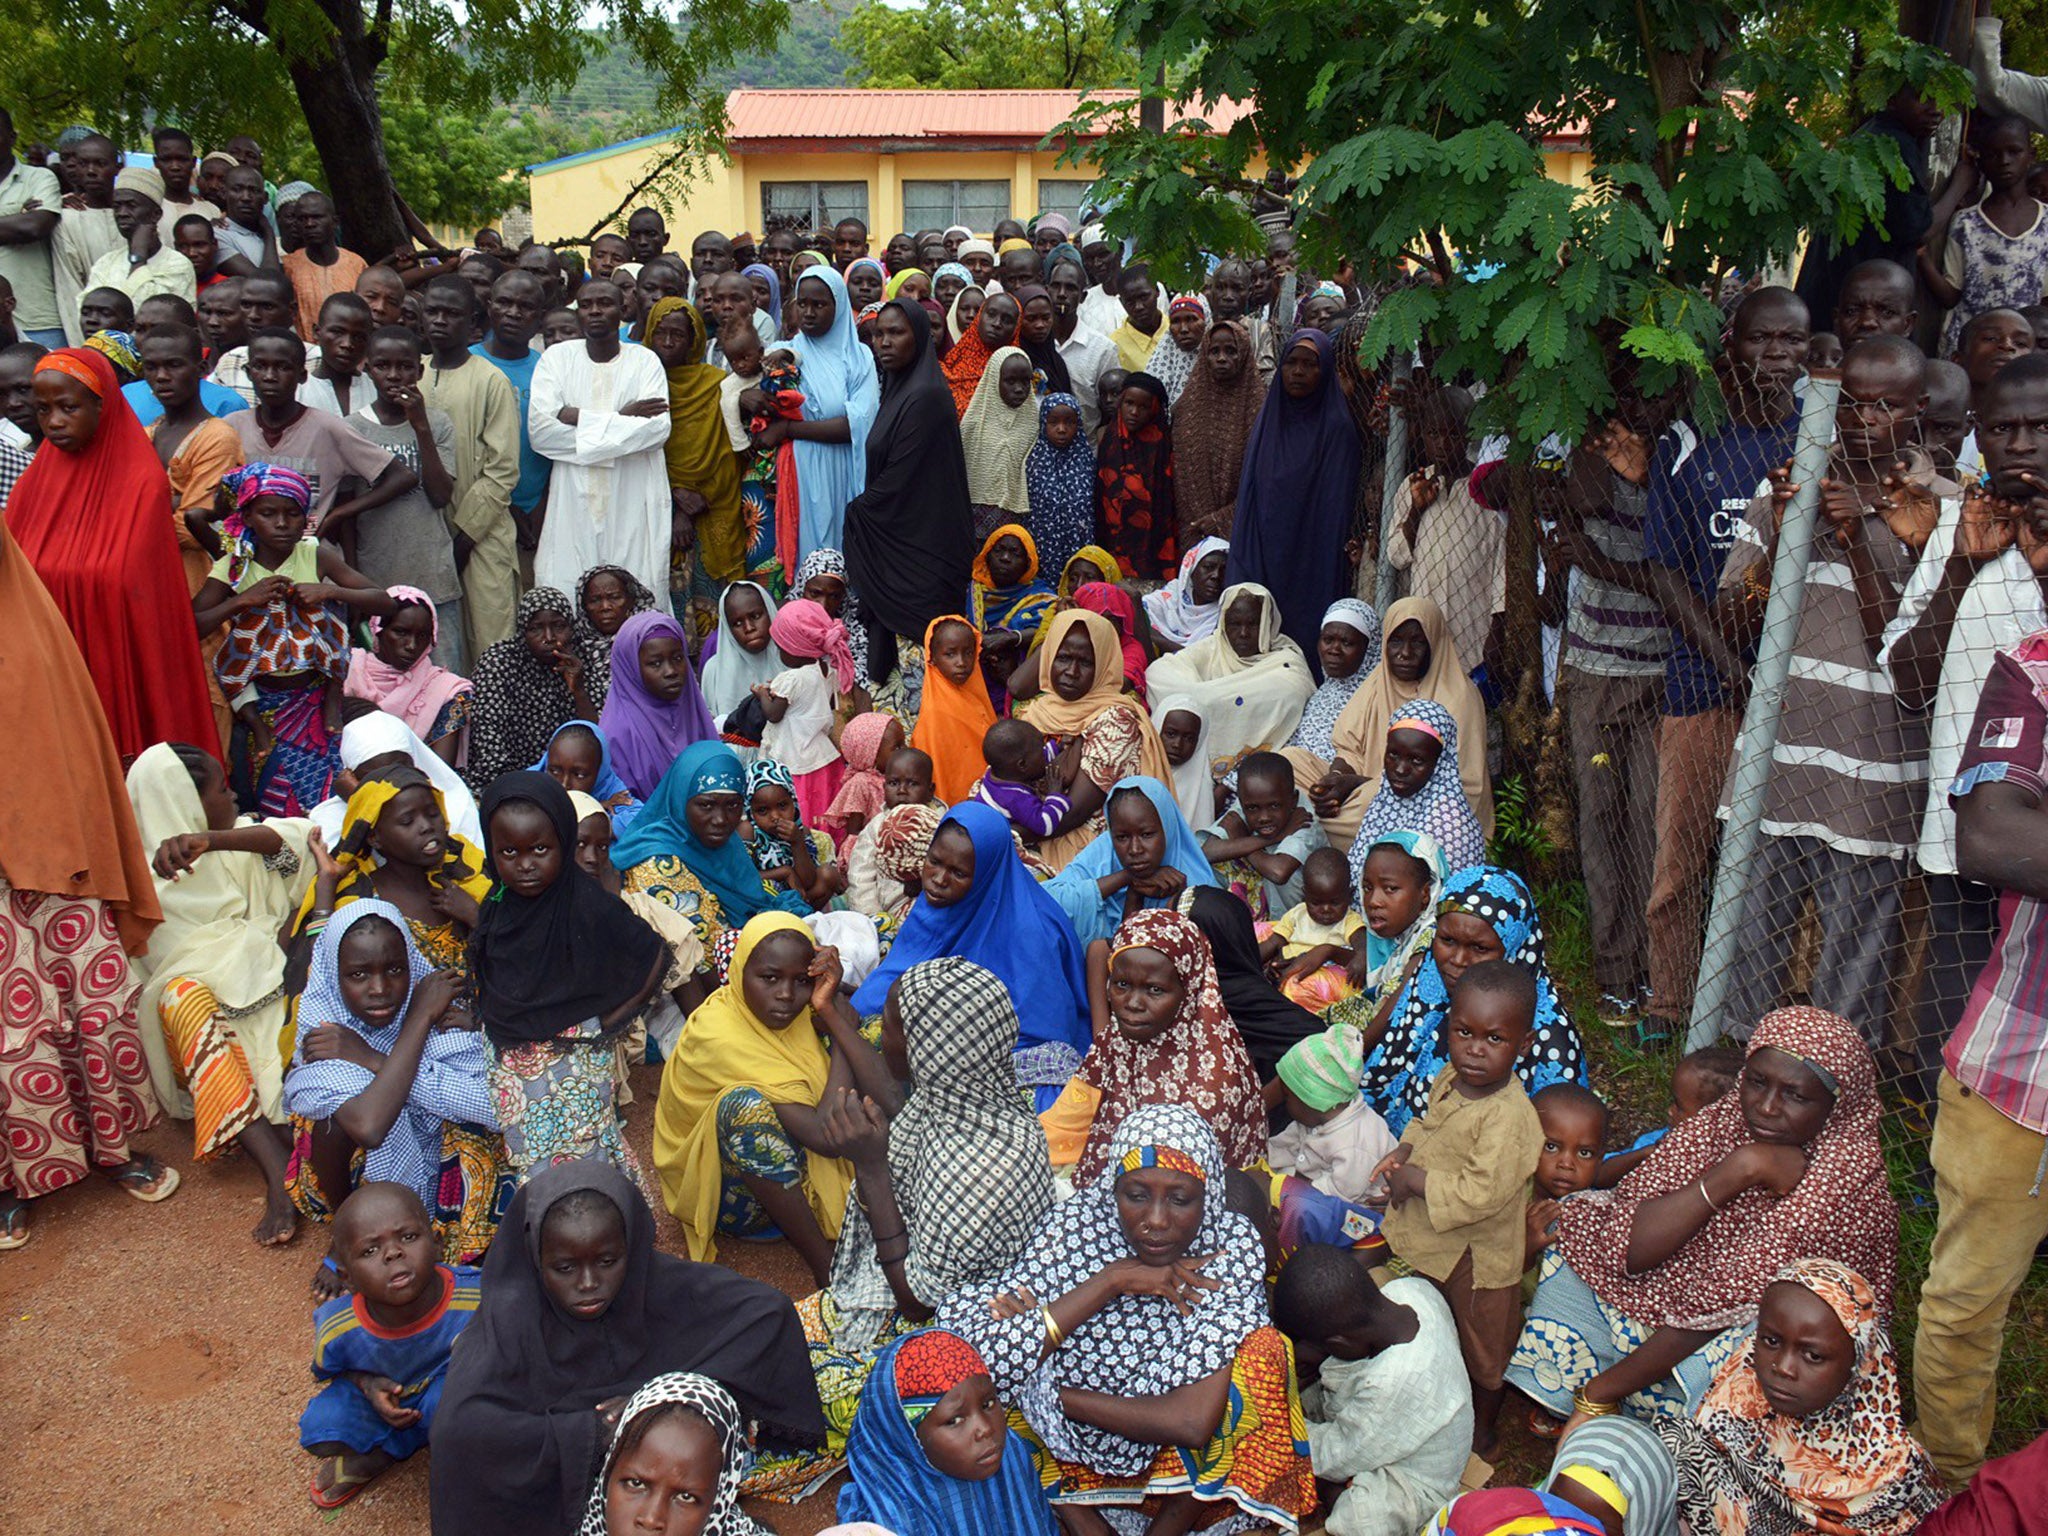 Internally Displaced People (IDP) who fled their homes in Gwoza, Borno State